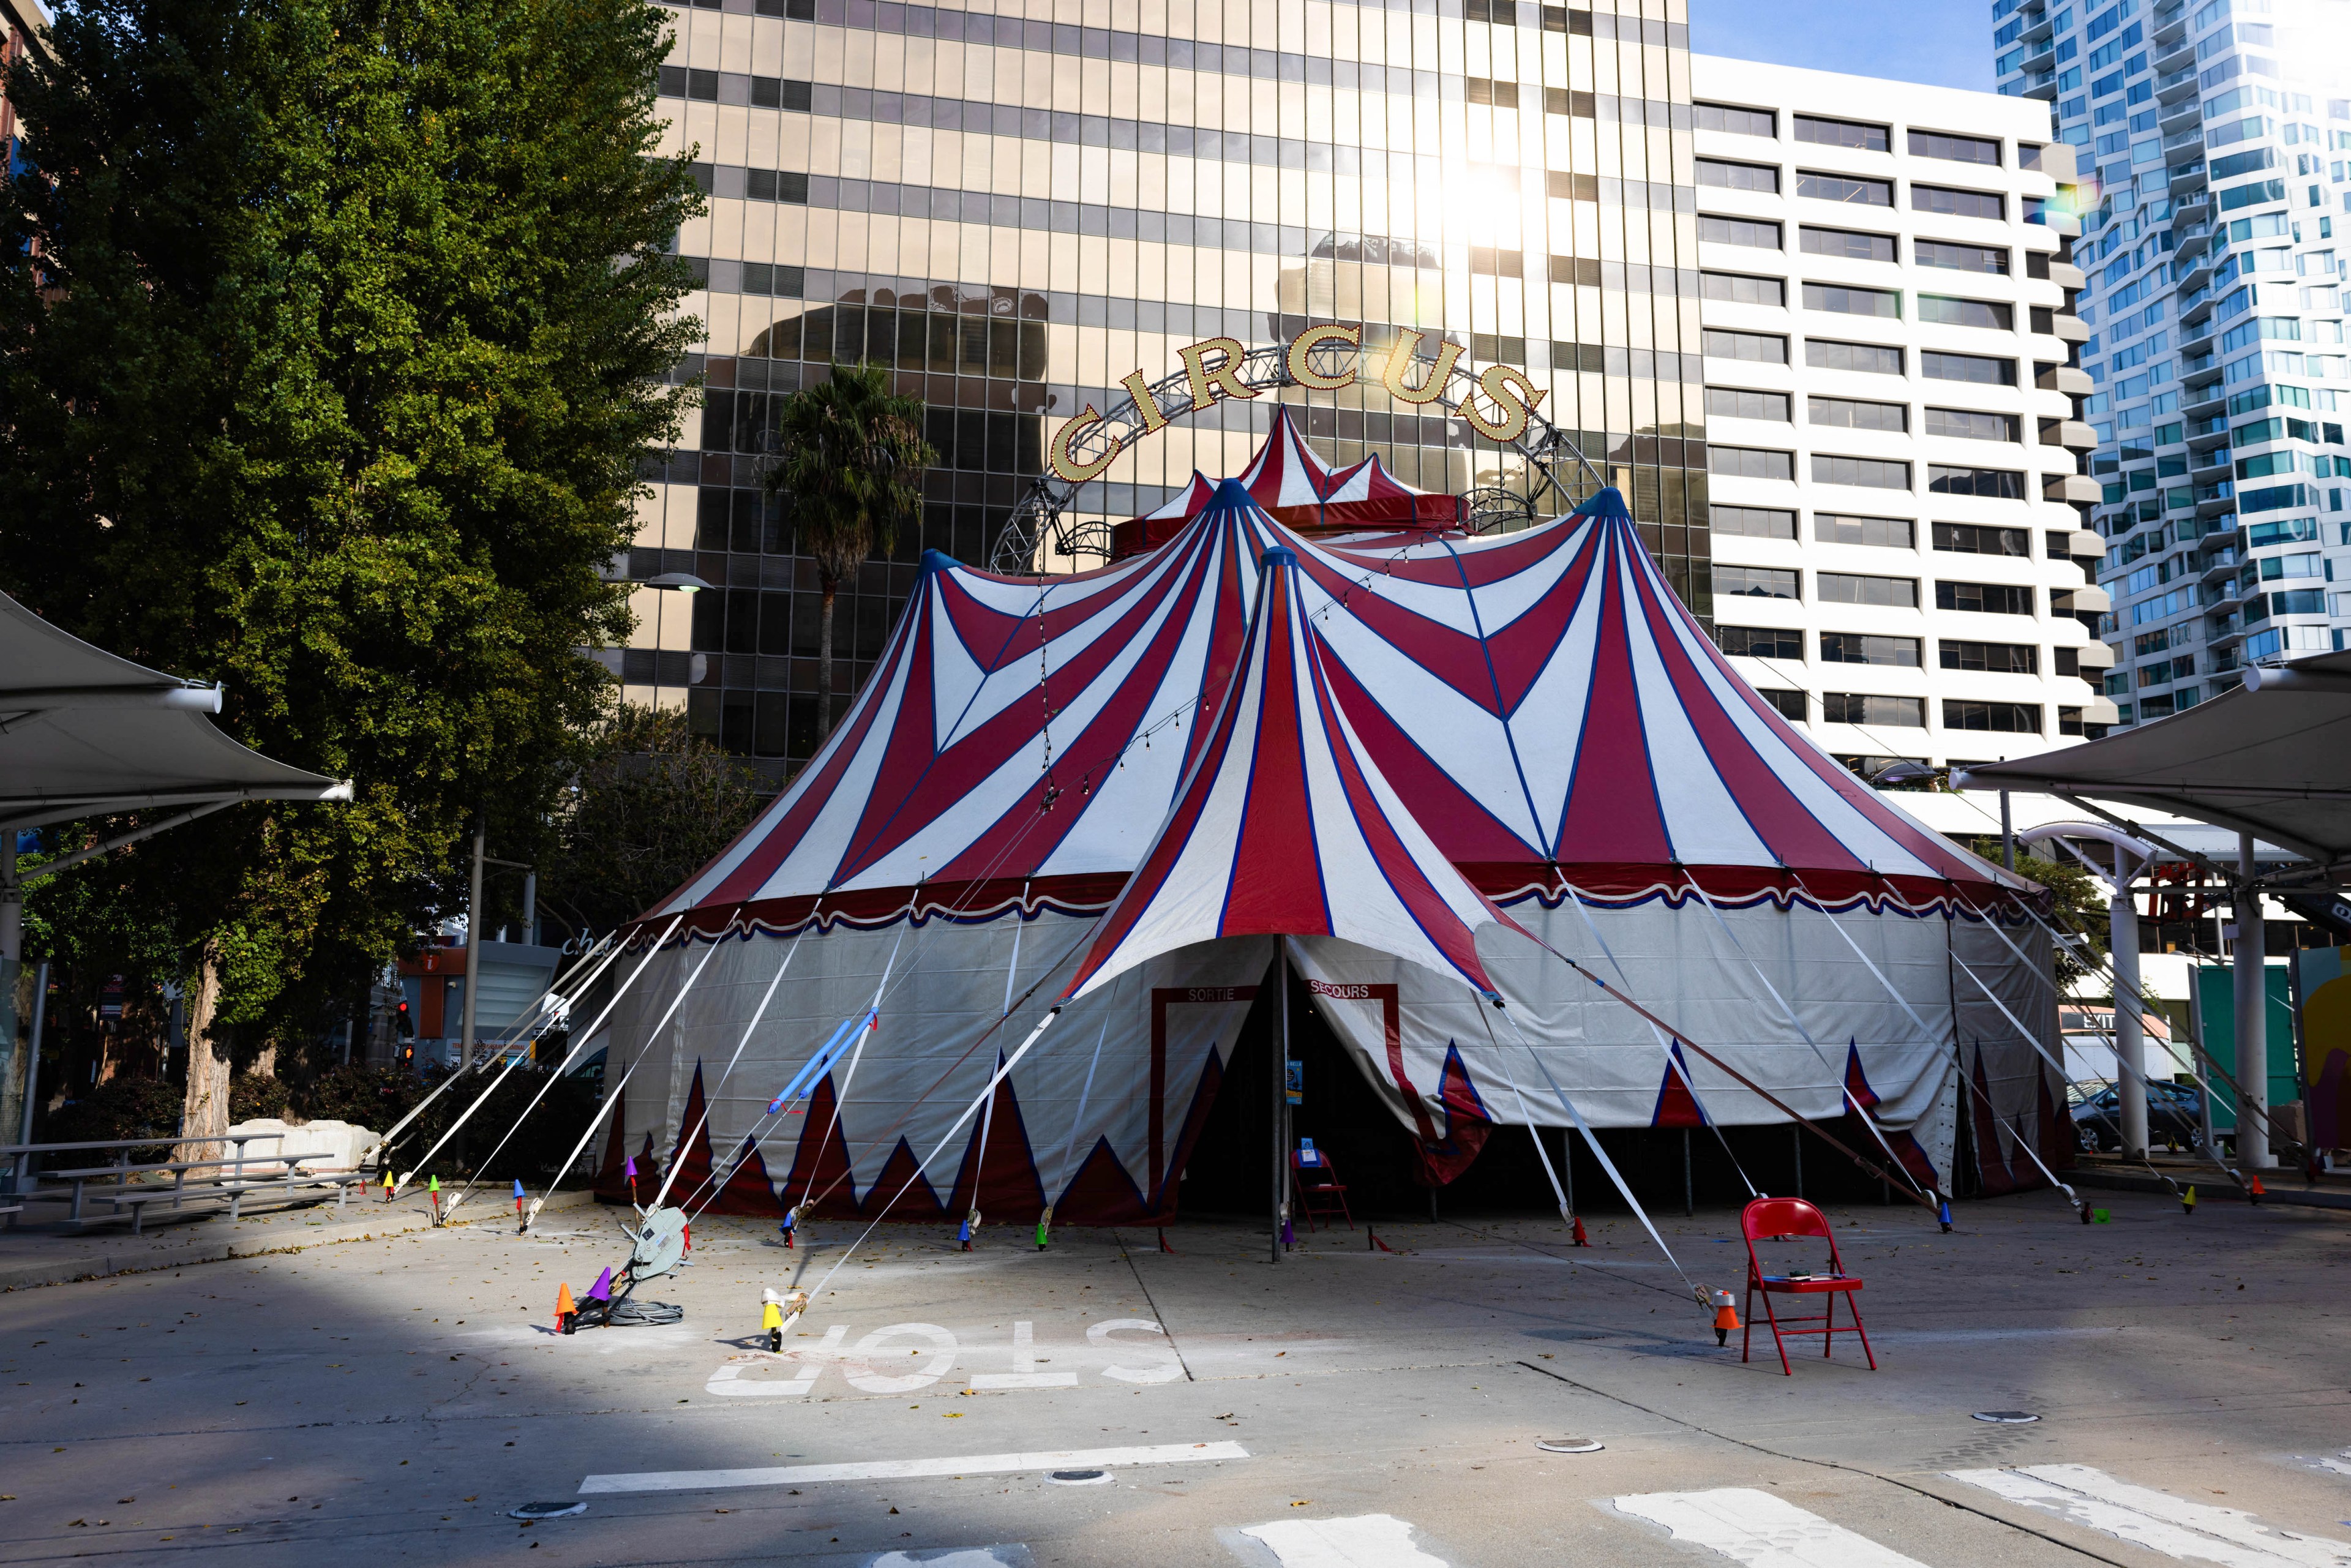 A red and white tent with Circus spelled a t the top at East Cut.